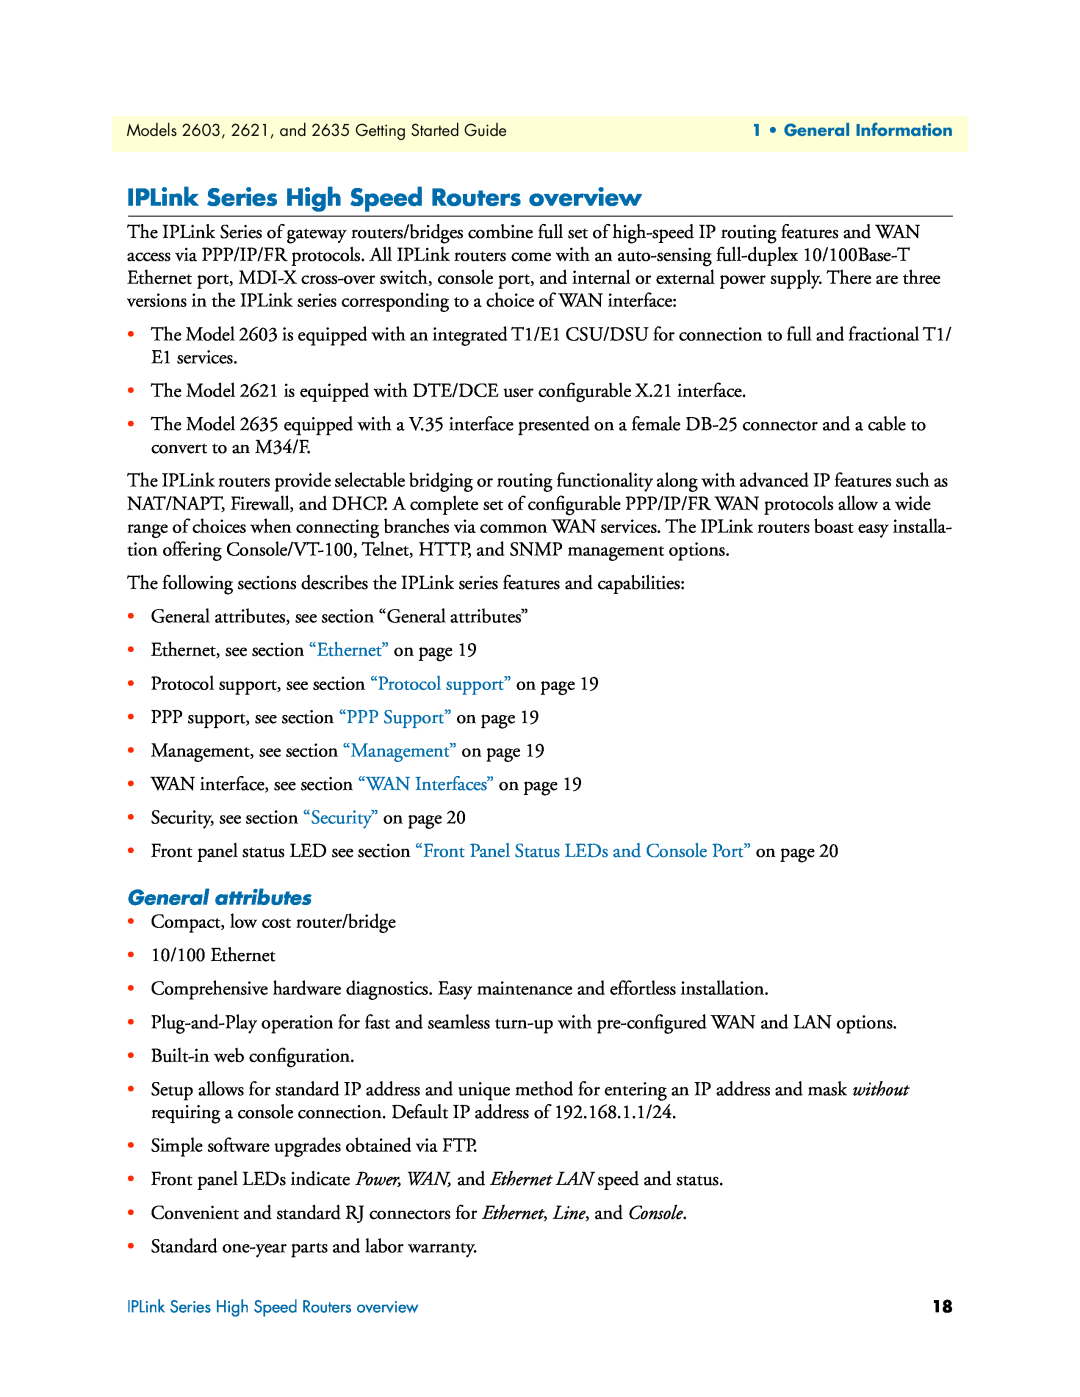 Patton electronic 2621, 2635 manual IPLink Series High Speed Routers overview, General attributes 